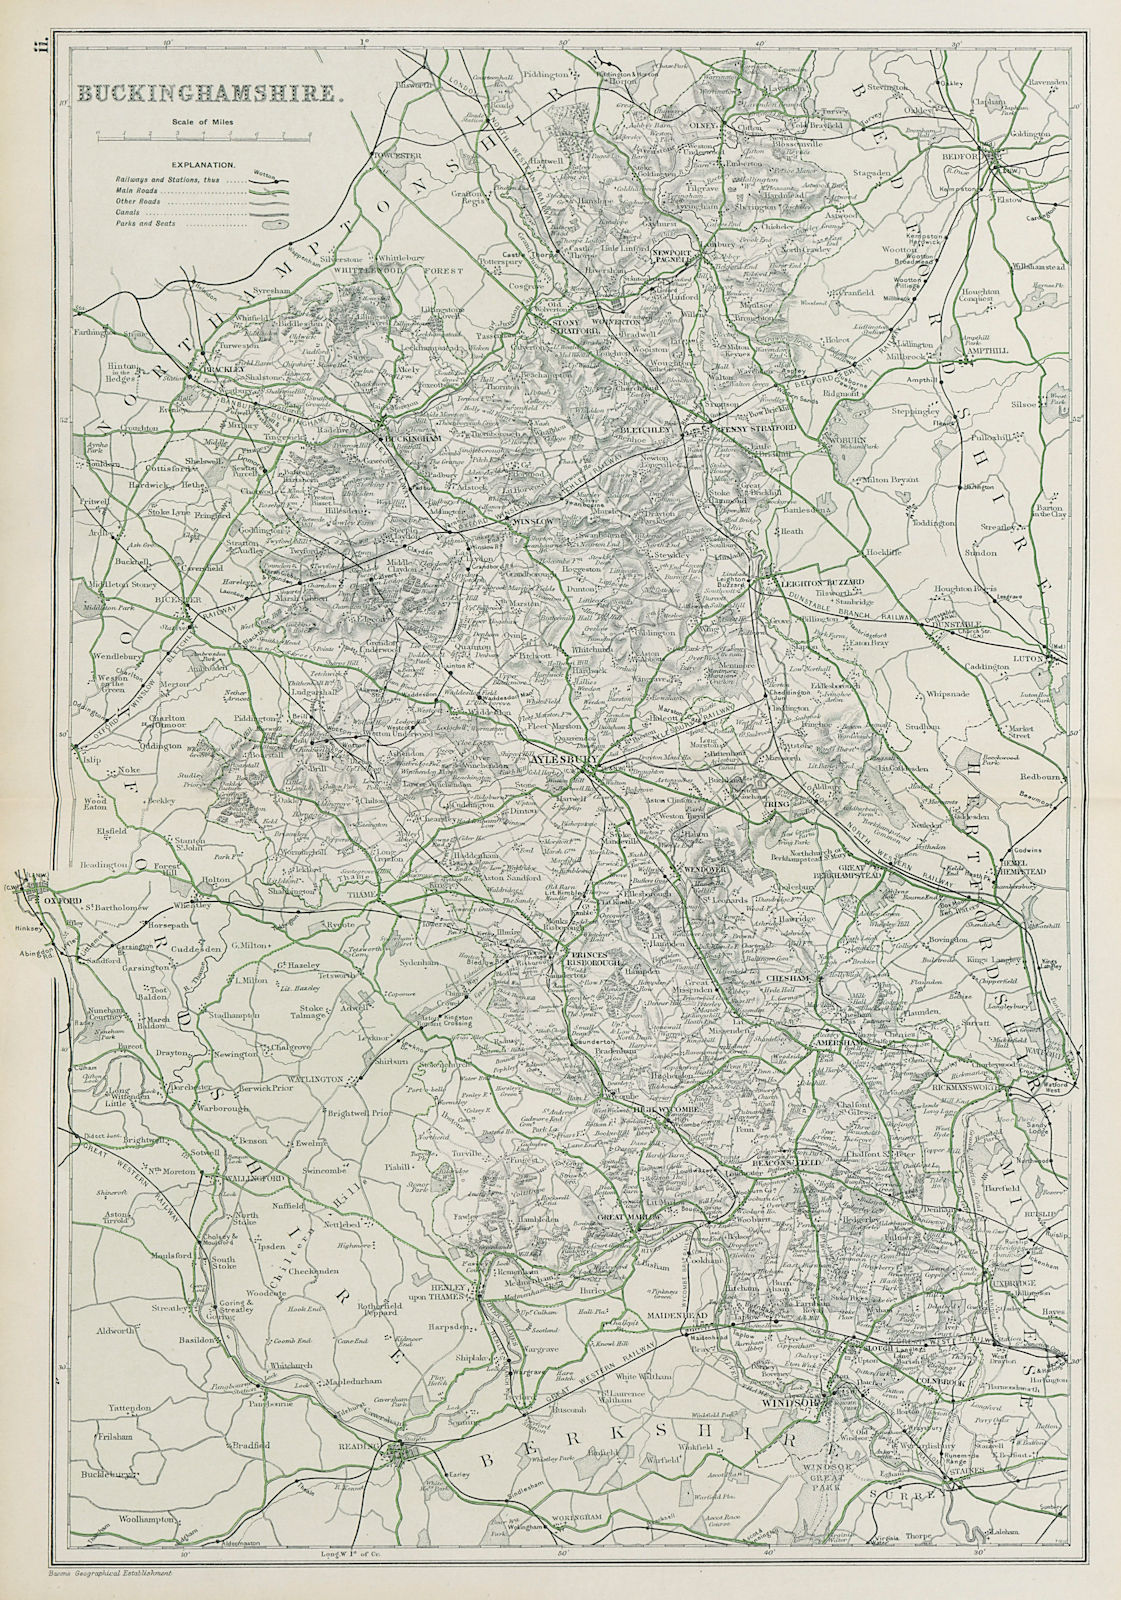 Associate Product BUCKINGHAMSHIRE. Showing Parliamentary divisions,boroughs & parks.BACON 1913 map